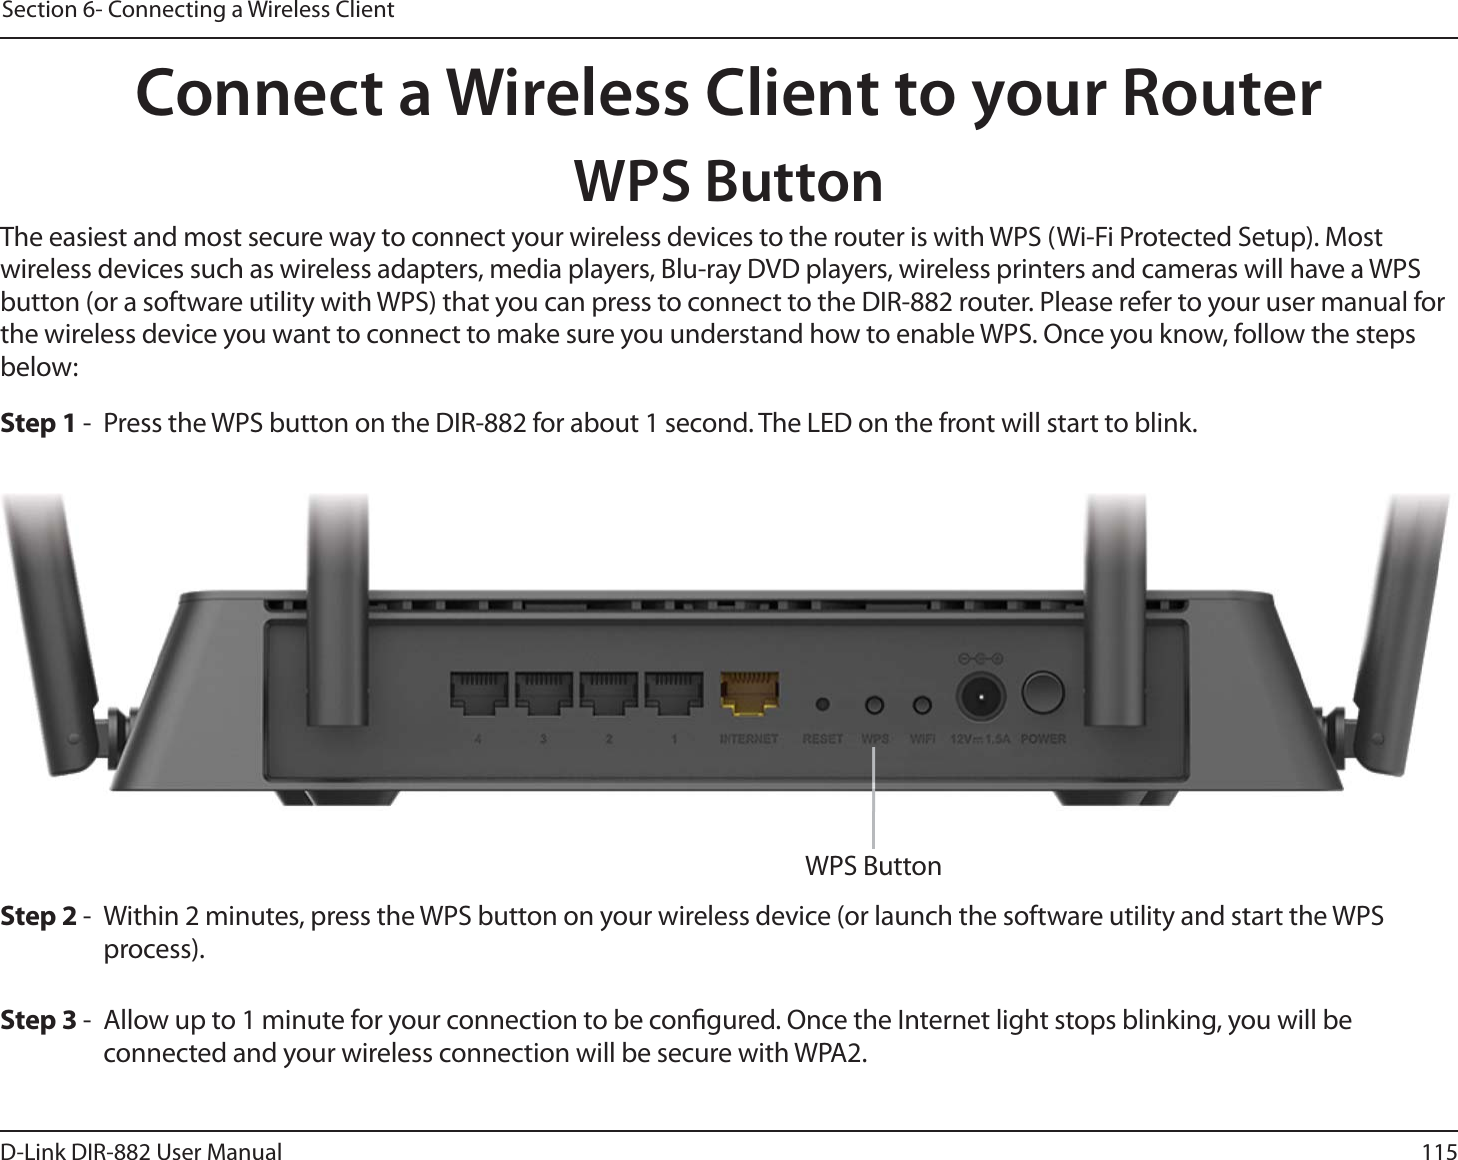 115D-Link DIR-882 User ManualSection 6- Connecting a Wireless ClientConnect a Wireless Client to your RouterWPS ButtonStep 2 -  Within 2 minutes, press the WPS button on your wireless device (or launch the software utility and start the WPS process).The easiest and most secure way to connect your wireless devices to the router is with WPS (Wi-Fi Protected Setup). Most wireless devices such as wireless adapters, media players, Blu-ray DVD players, wireless printers and cameras will have a WPS button (or a software utility with WPS) that you can press to connect to the DIR-882 router. Please refer to your user manual for the wireless device you want to connect to make sure you understand how to enable WPS. Once you know, follow the steps below:Step 1 -  Press the WPS button on the DIR-882 for about 1 second. The LED on the front will start to blink.Step 3 -  Allow up to 1 minute for your connection to be congured. Once the Internet light stops blinking, you will be connected and your wireless connection will be secure with WPA2.WPS Button